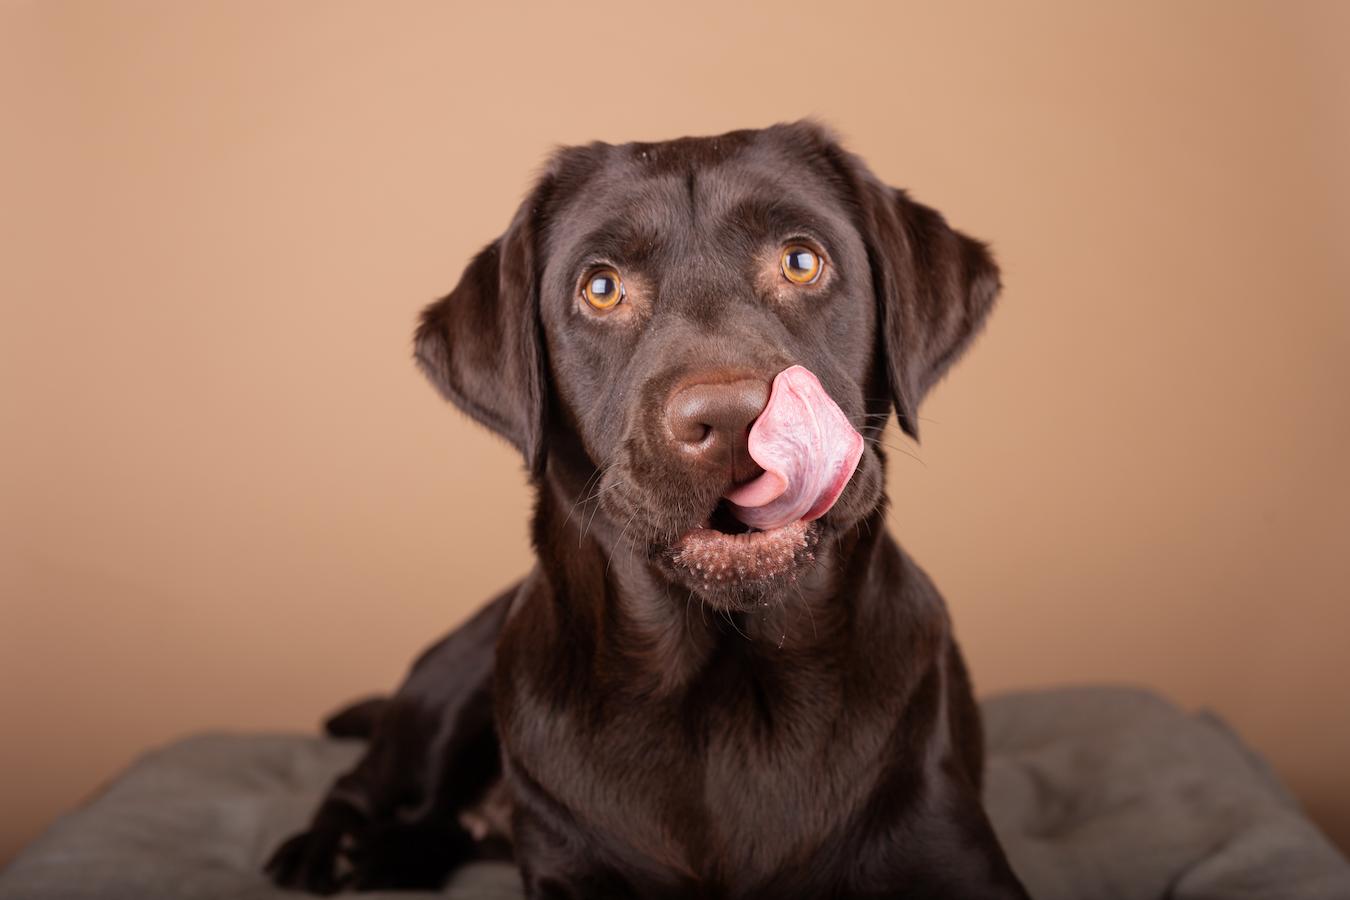 chocolate lab dog licking his lips temperament comments comment account answer dog breed dog breed quiz register steak lifestyle wondering